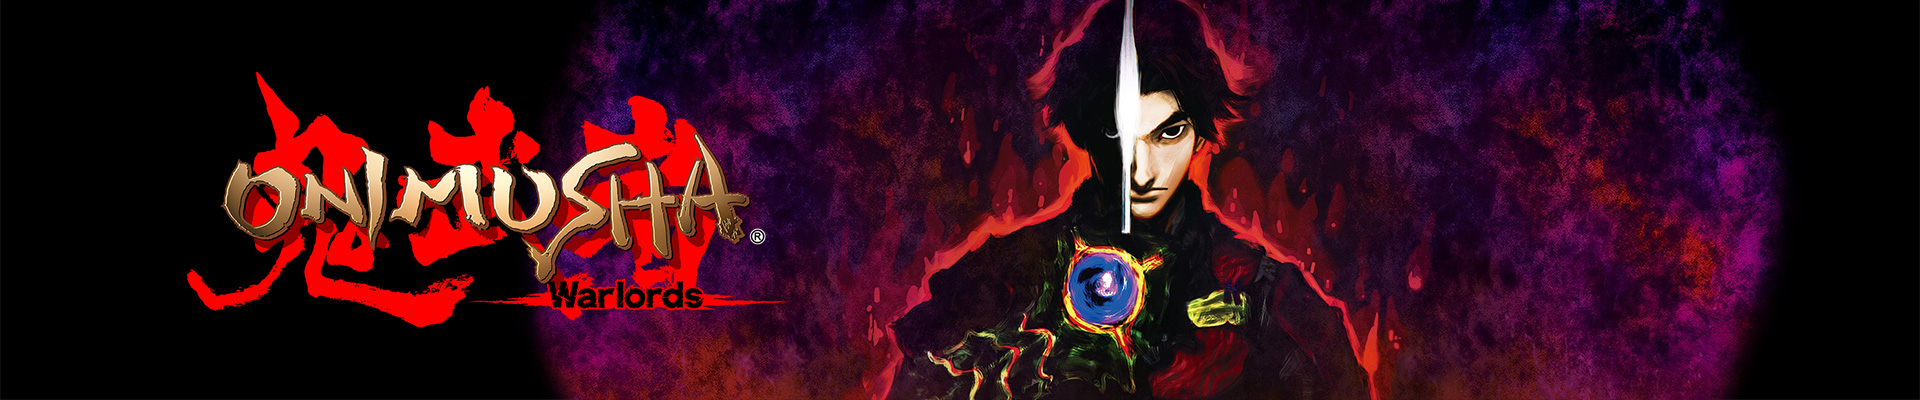 Thoughts on: Onimusha: Warlords